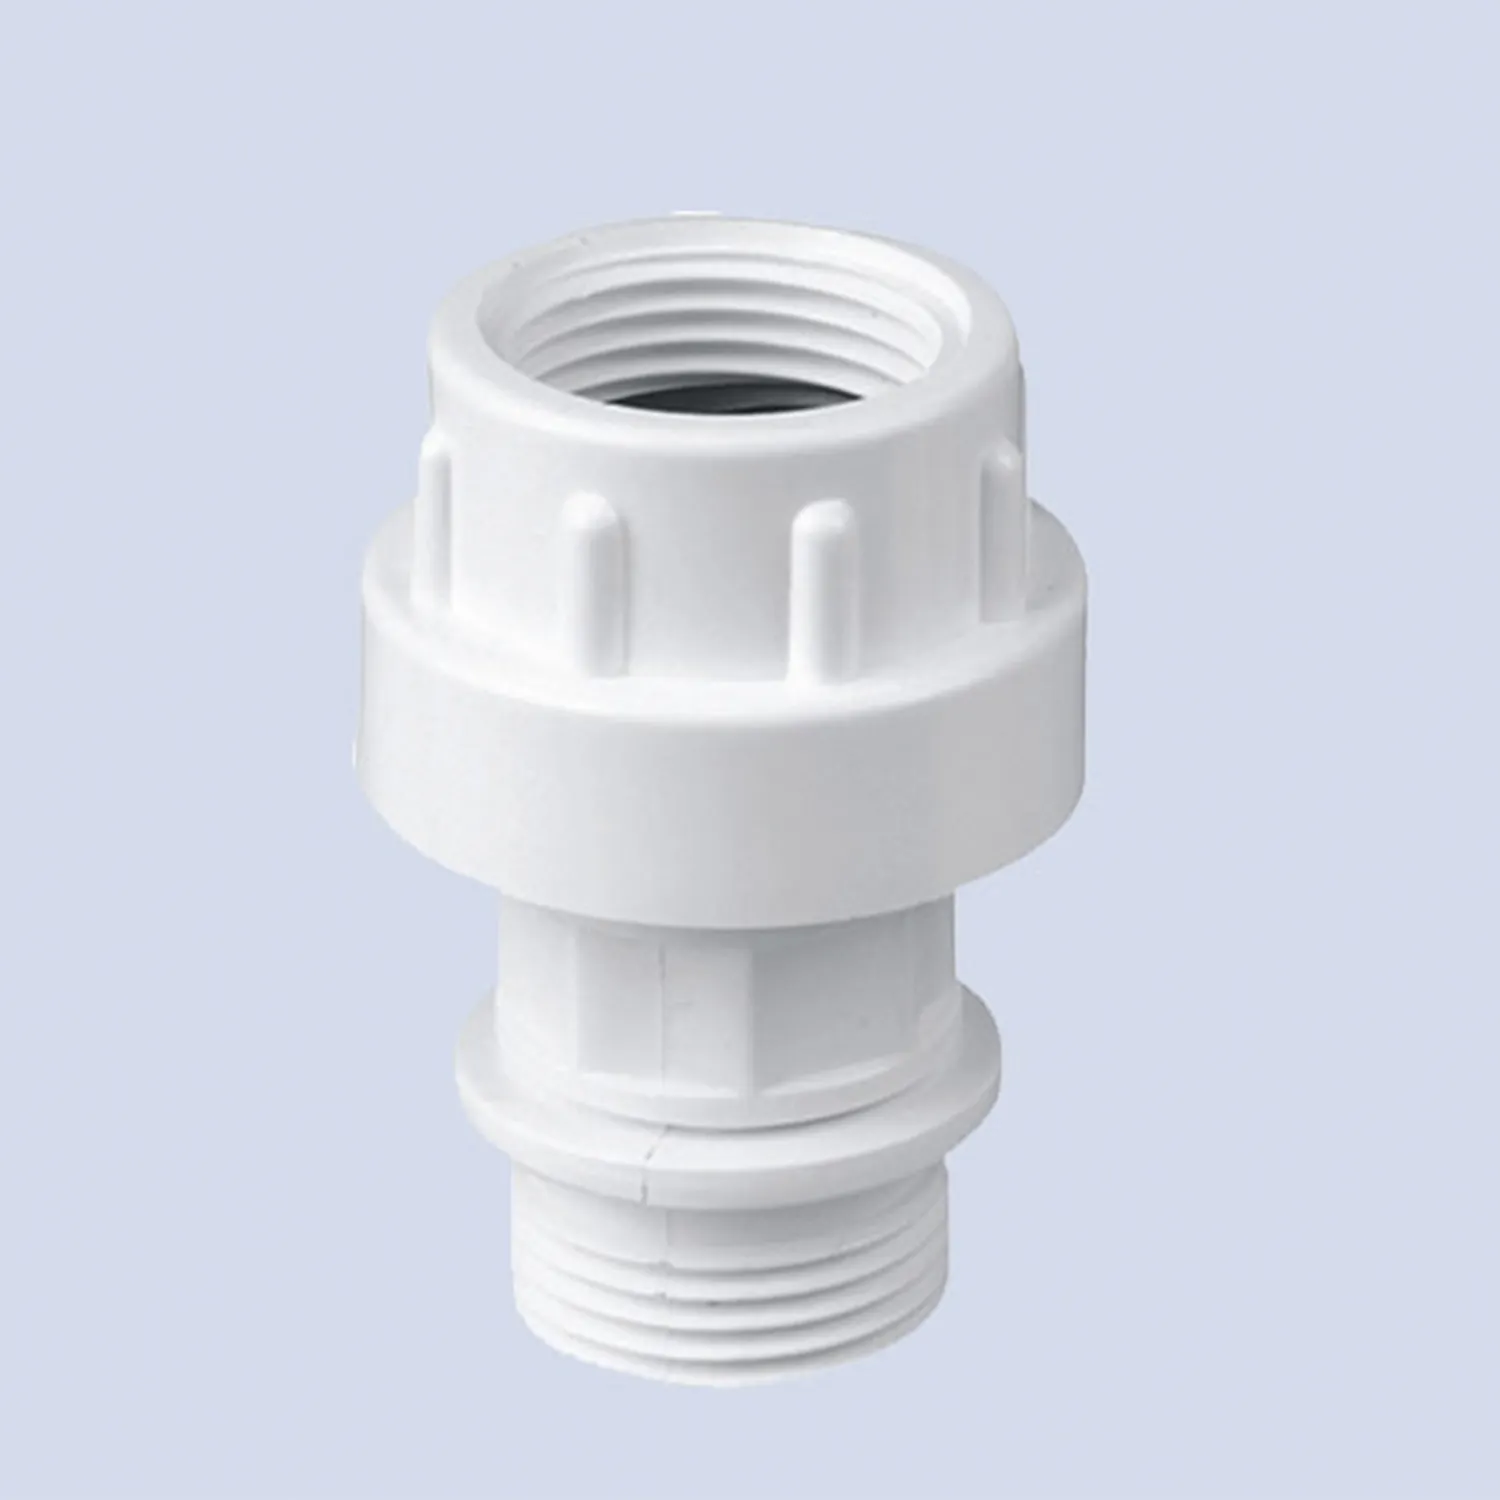 Hot sales in the factory in the current season union with movable head high pressure pipe fittings chart